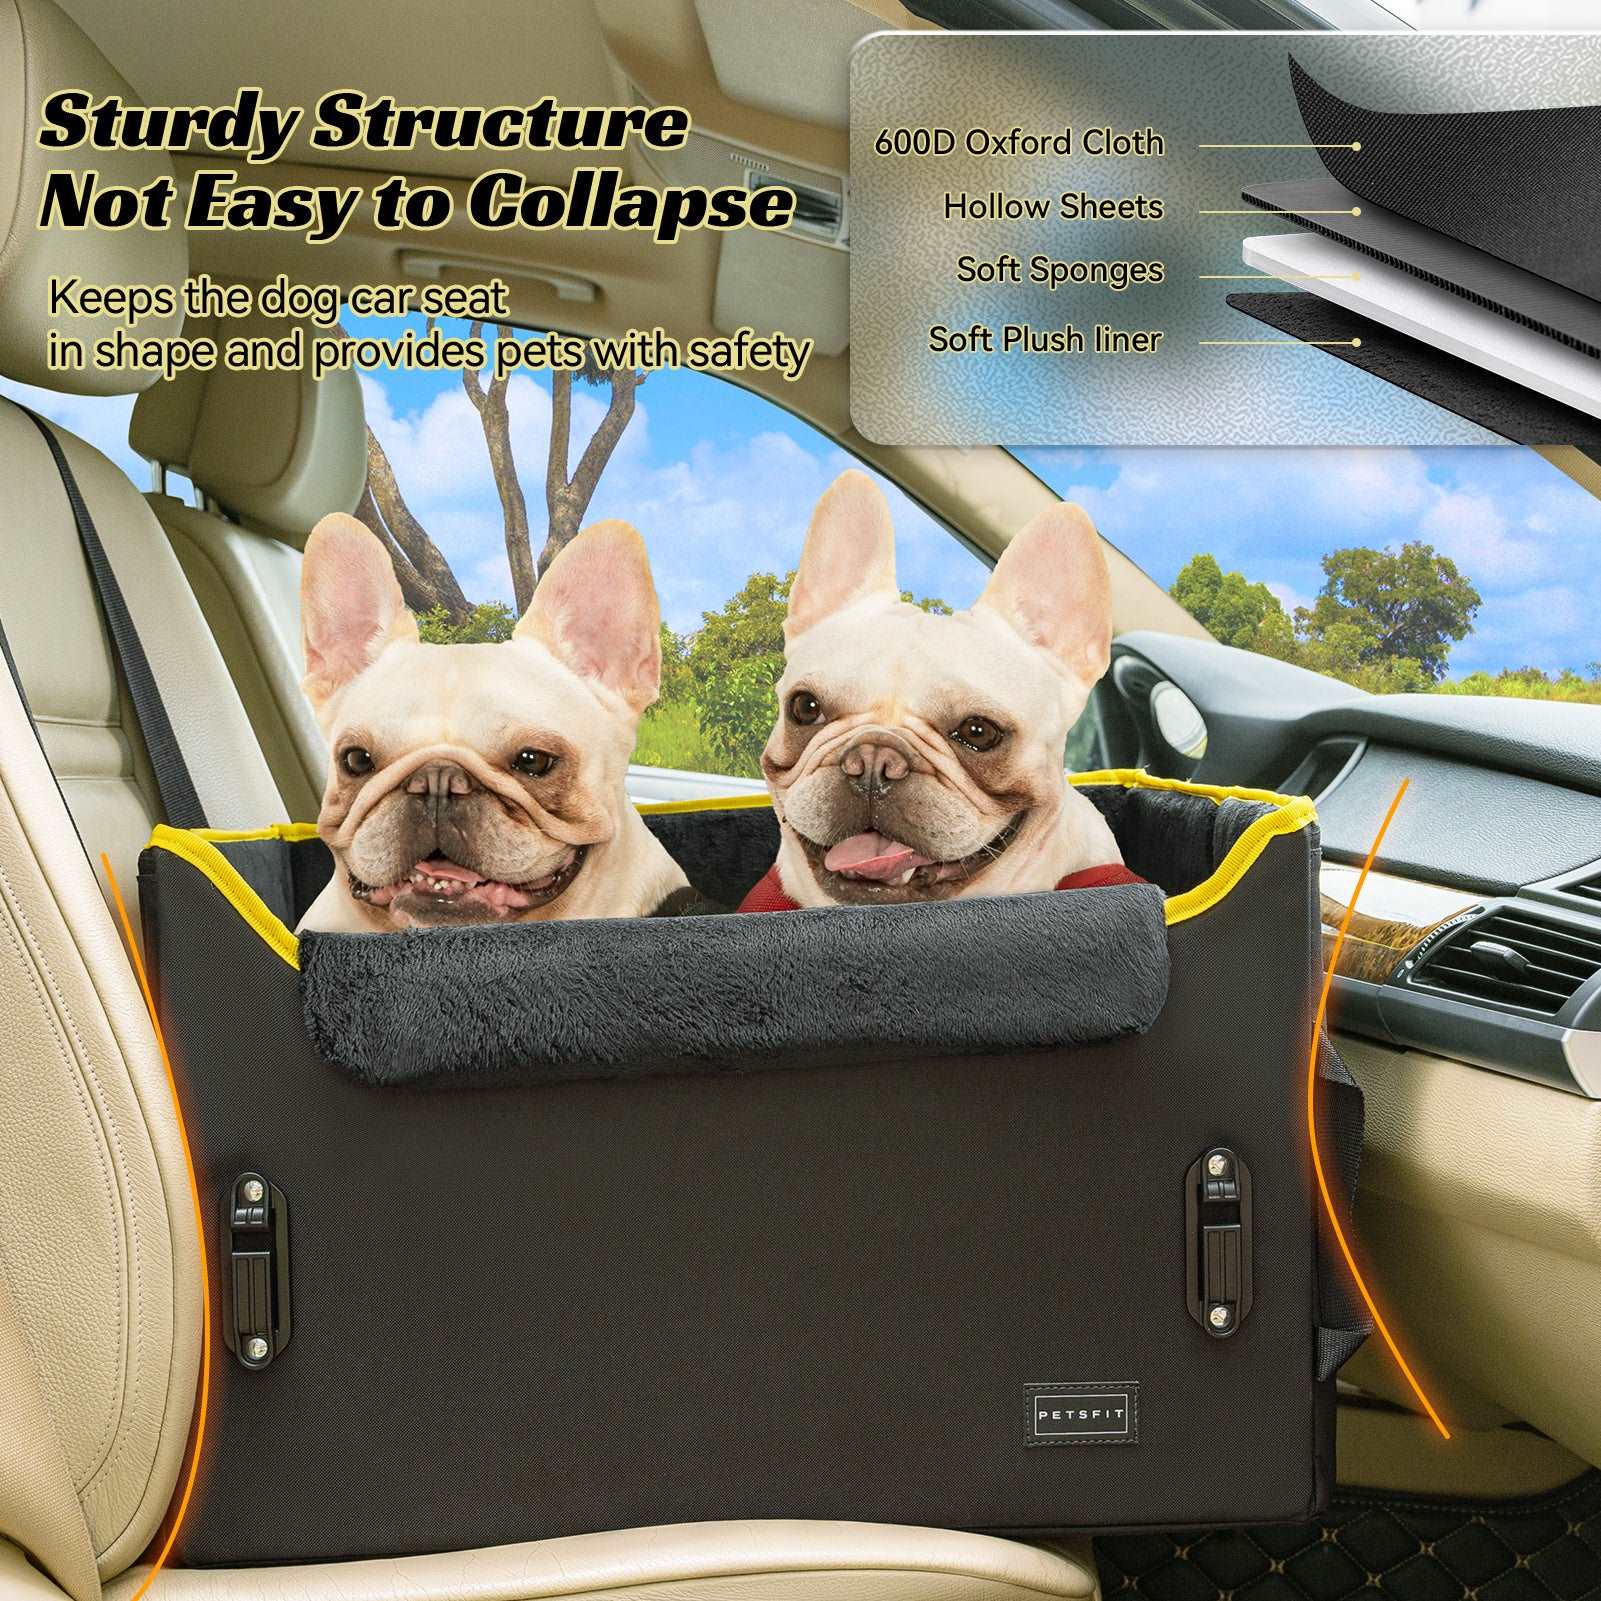 petsfit-dog-booster-car-seat-dog-car-seat-for-medium-dogs-with-2-clip-on-safety-leashes-10